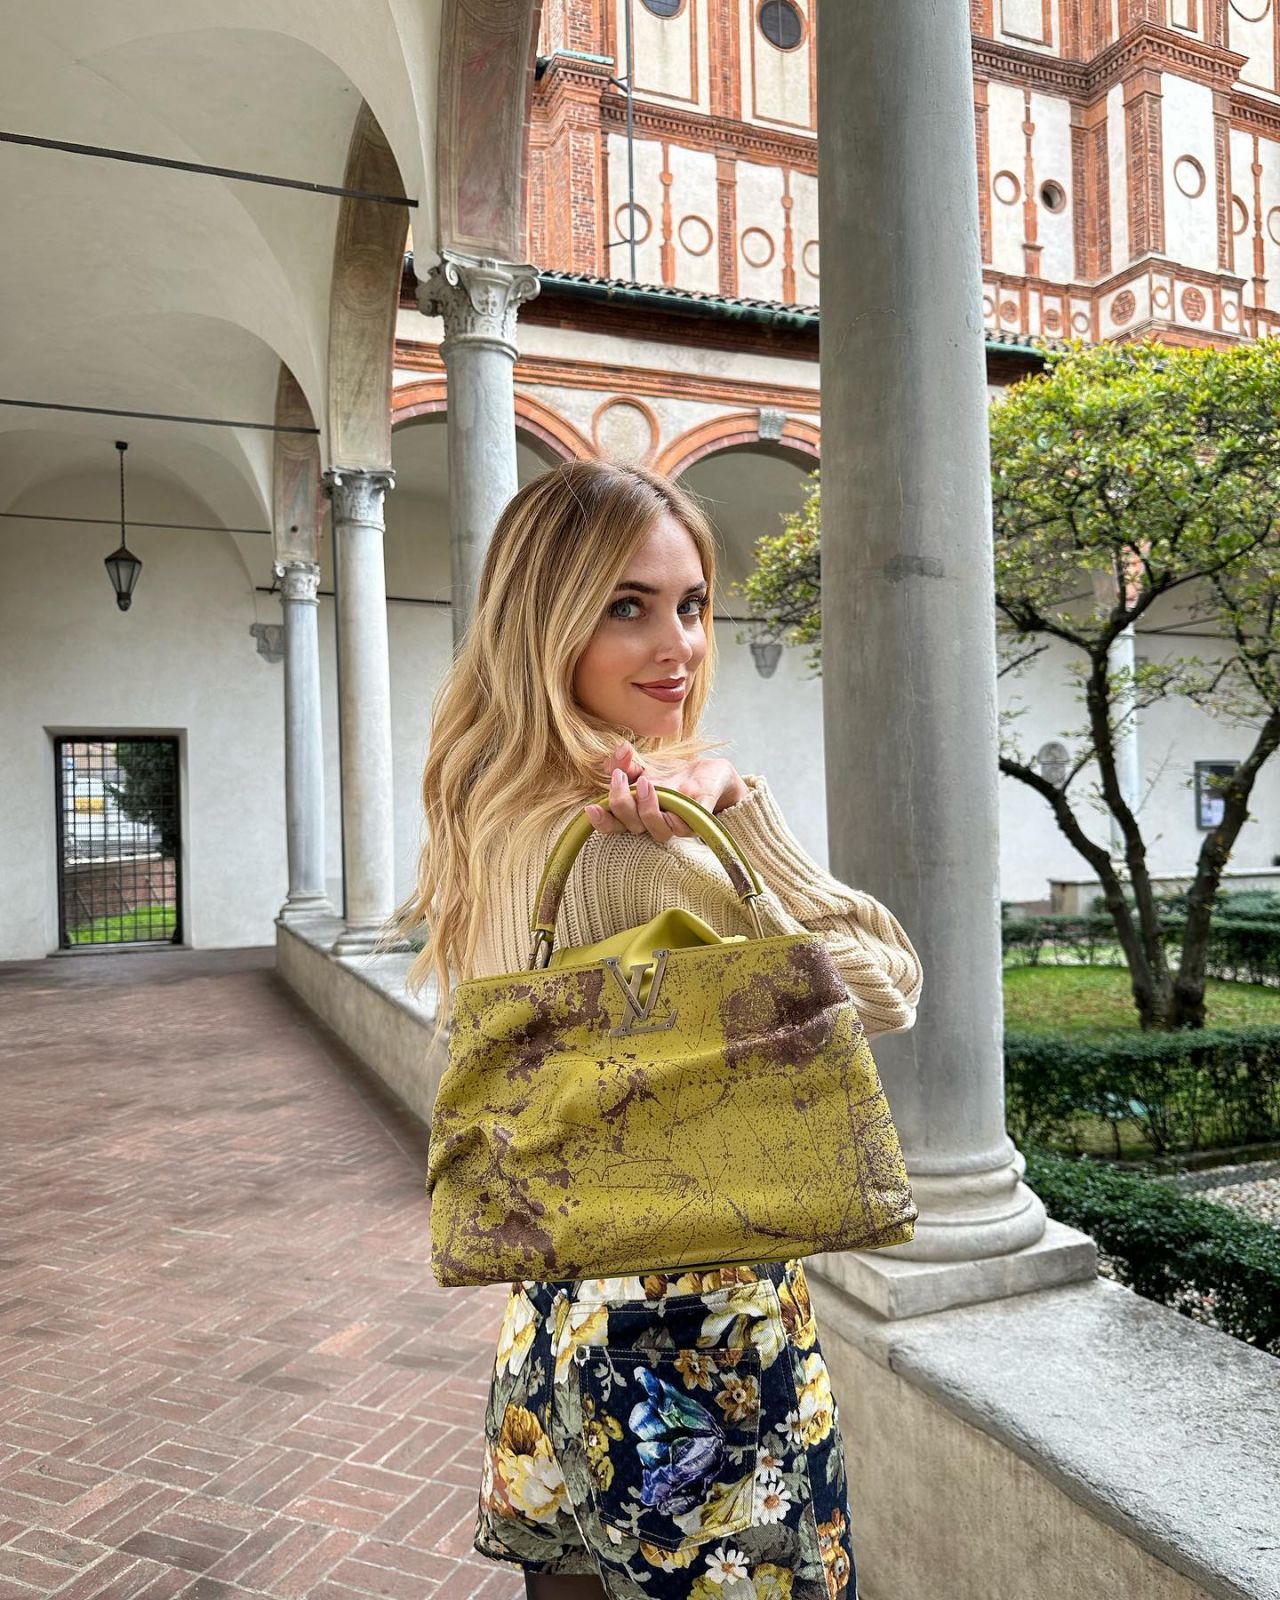 Chiara Ferragni ✨ on Instagram: Look of the day wearing the new @ LouisVuitton Capucines bag 💛 It's a limited edition t…